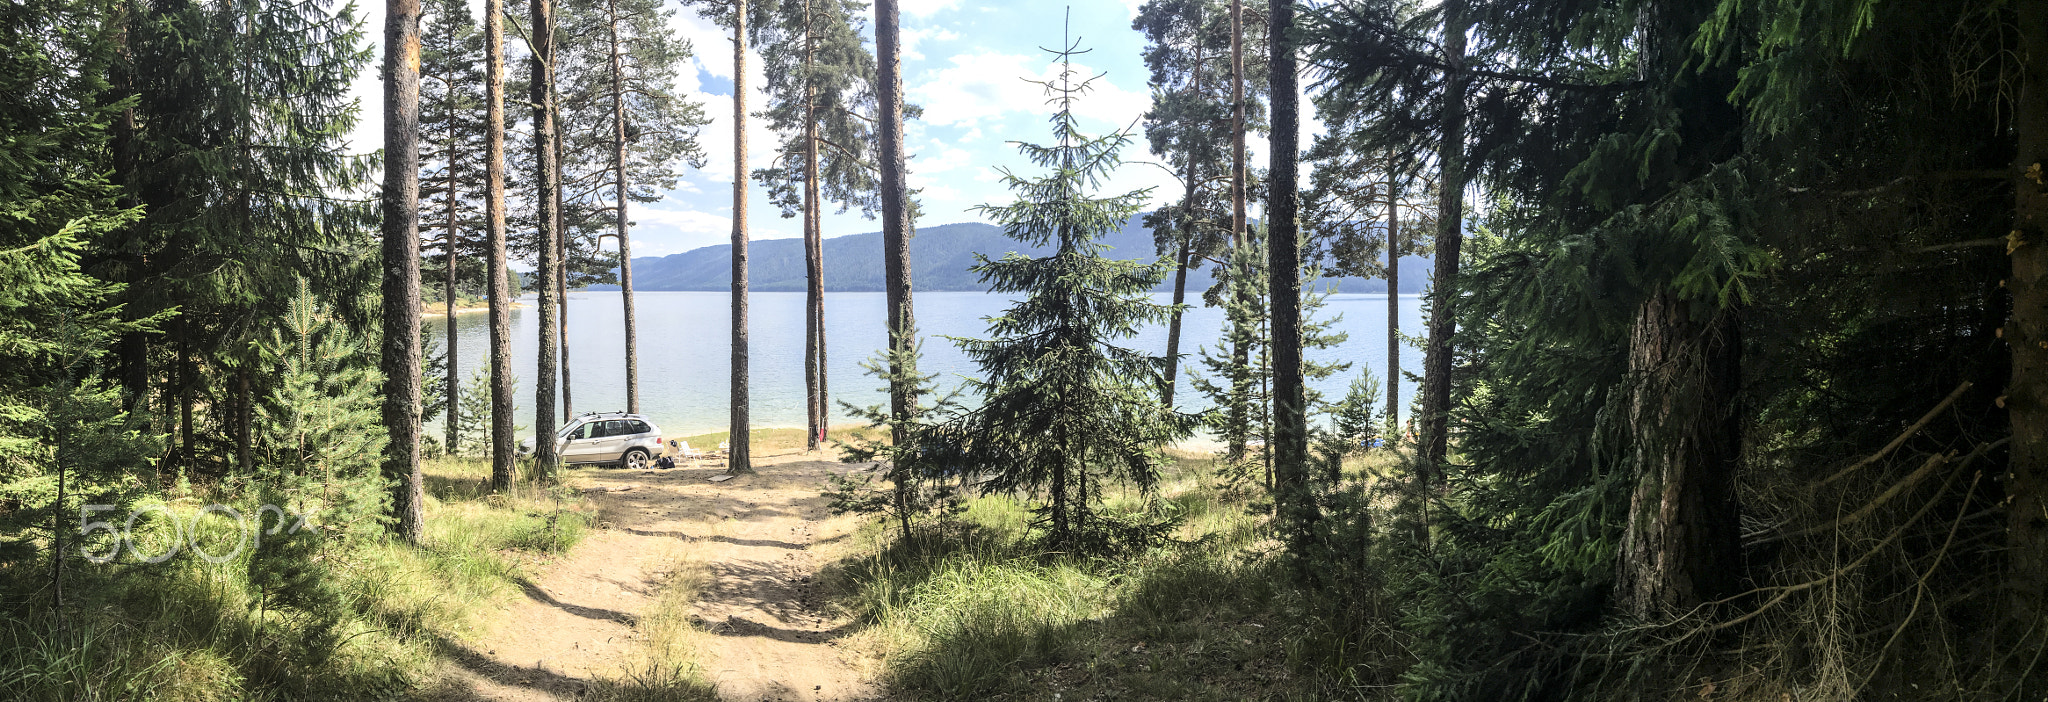 Panoramic image of forest and mountain lake. Tents and car in th